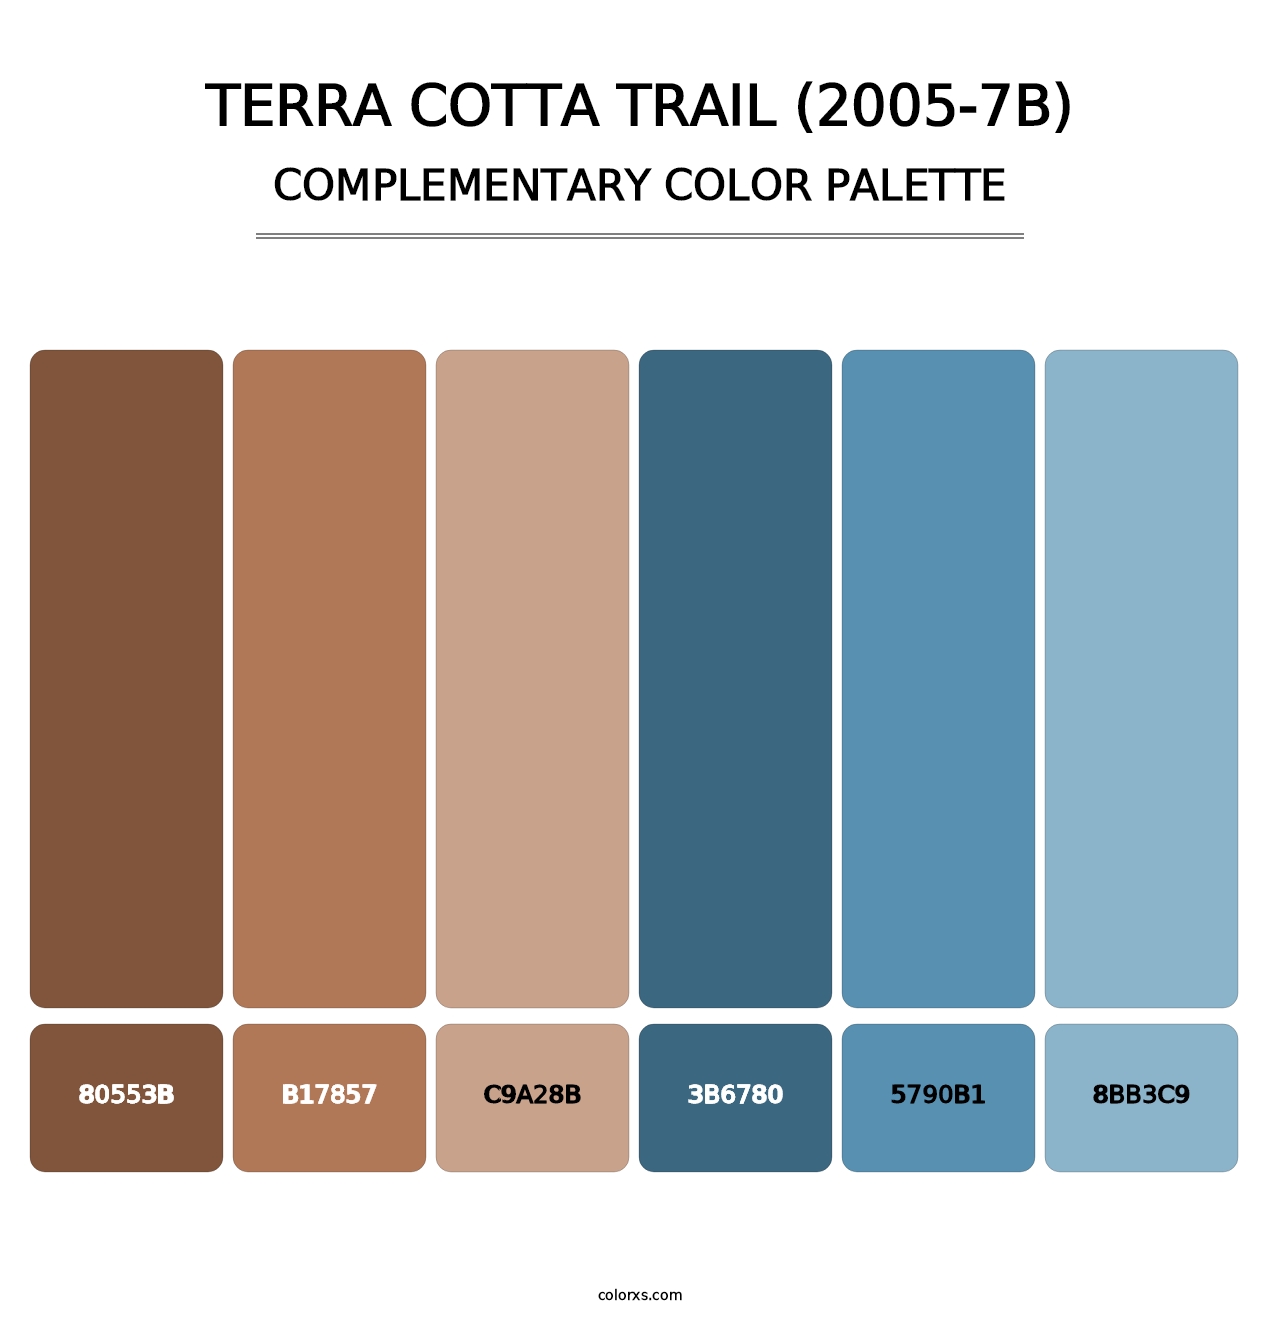 Terra Cotta Trail (2005-7B) - Complementary Color Palette